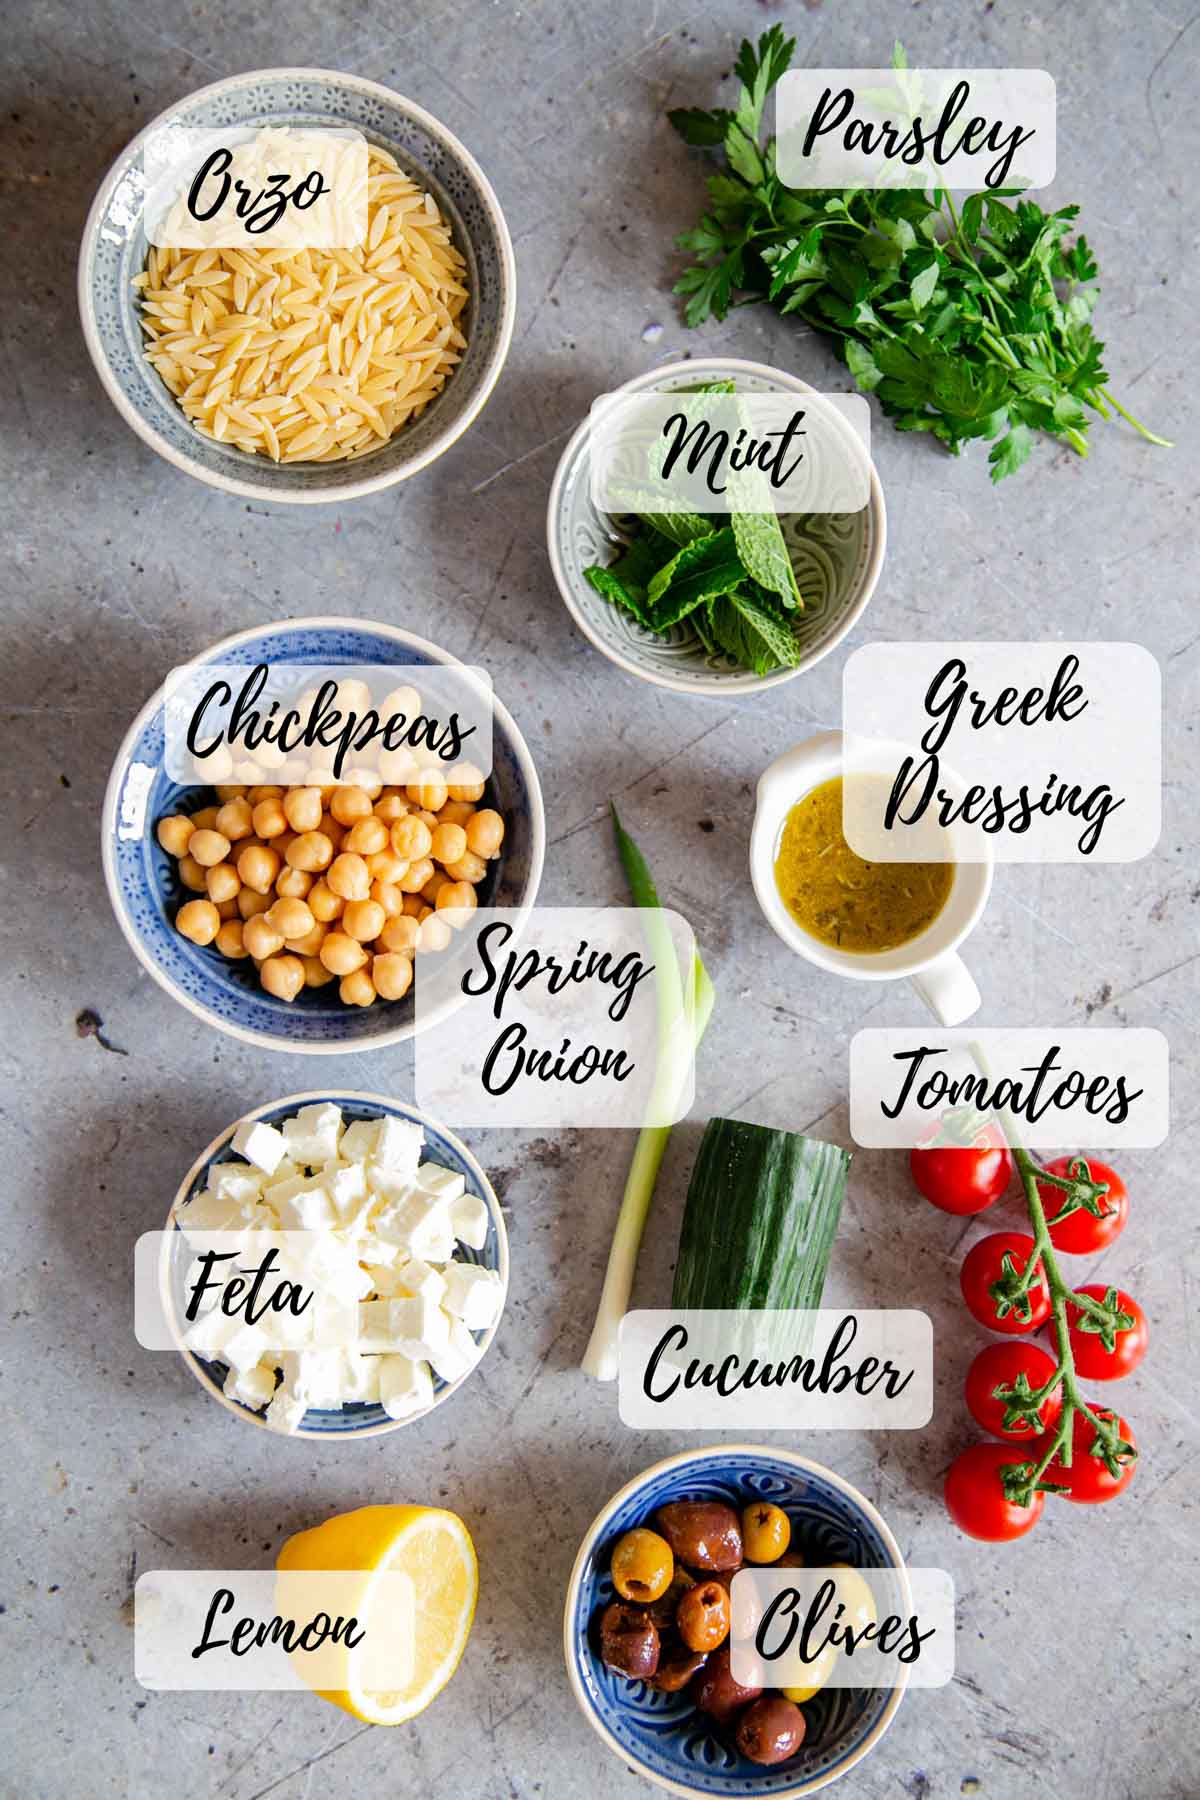 The ingredients, ready to cook: orzo pasta, parsley, mint, Greek salad dressing, cucumber, tomatoes and spring onion, olives, lemon, feta cheese and chickpeas.